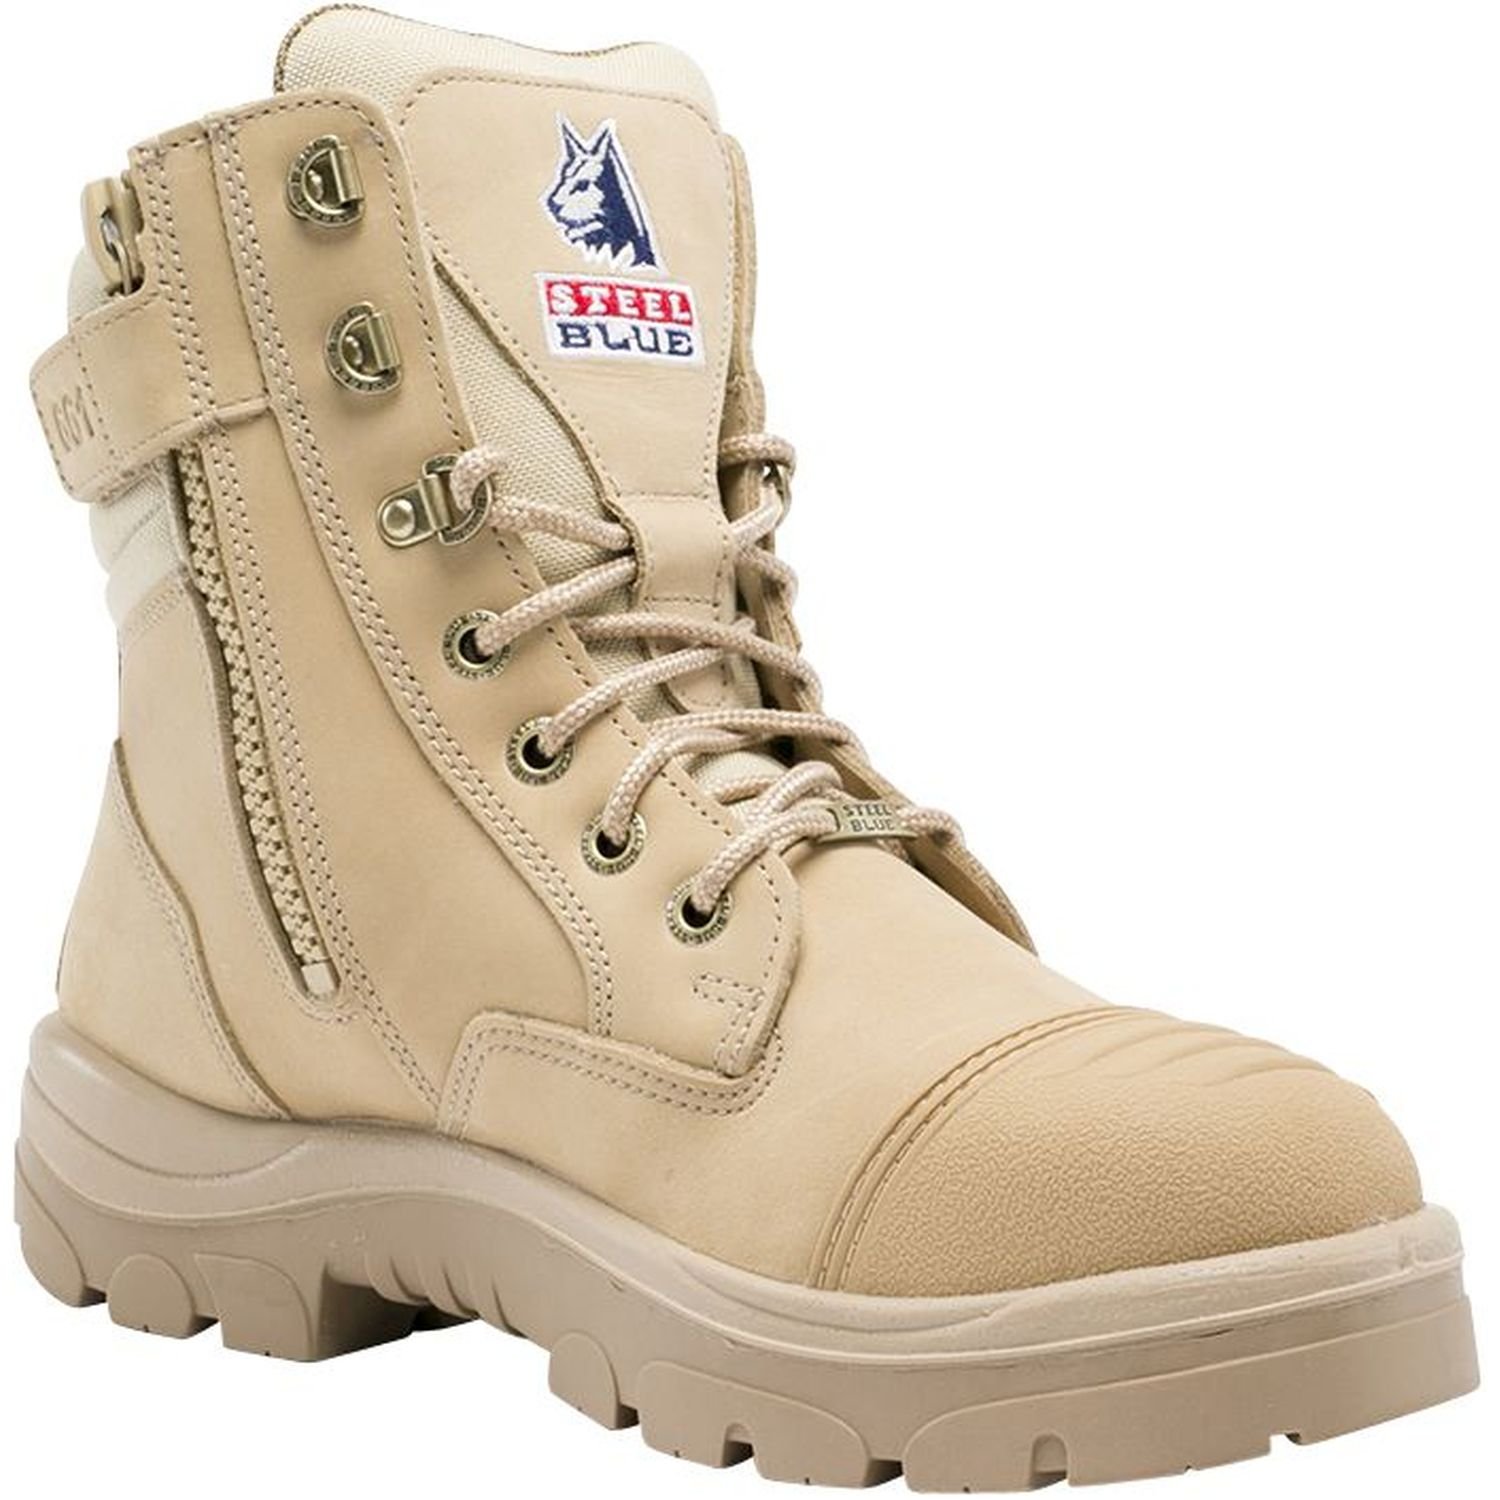 Steel Blue Southern Cross Lace Up Zip Side 150mm Safety Boot with Scuff Cap